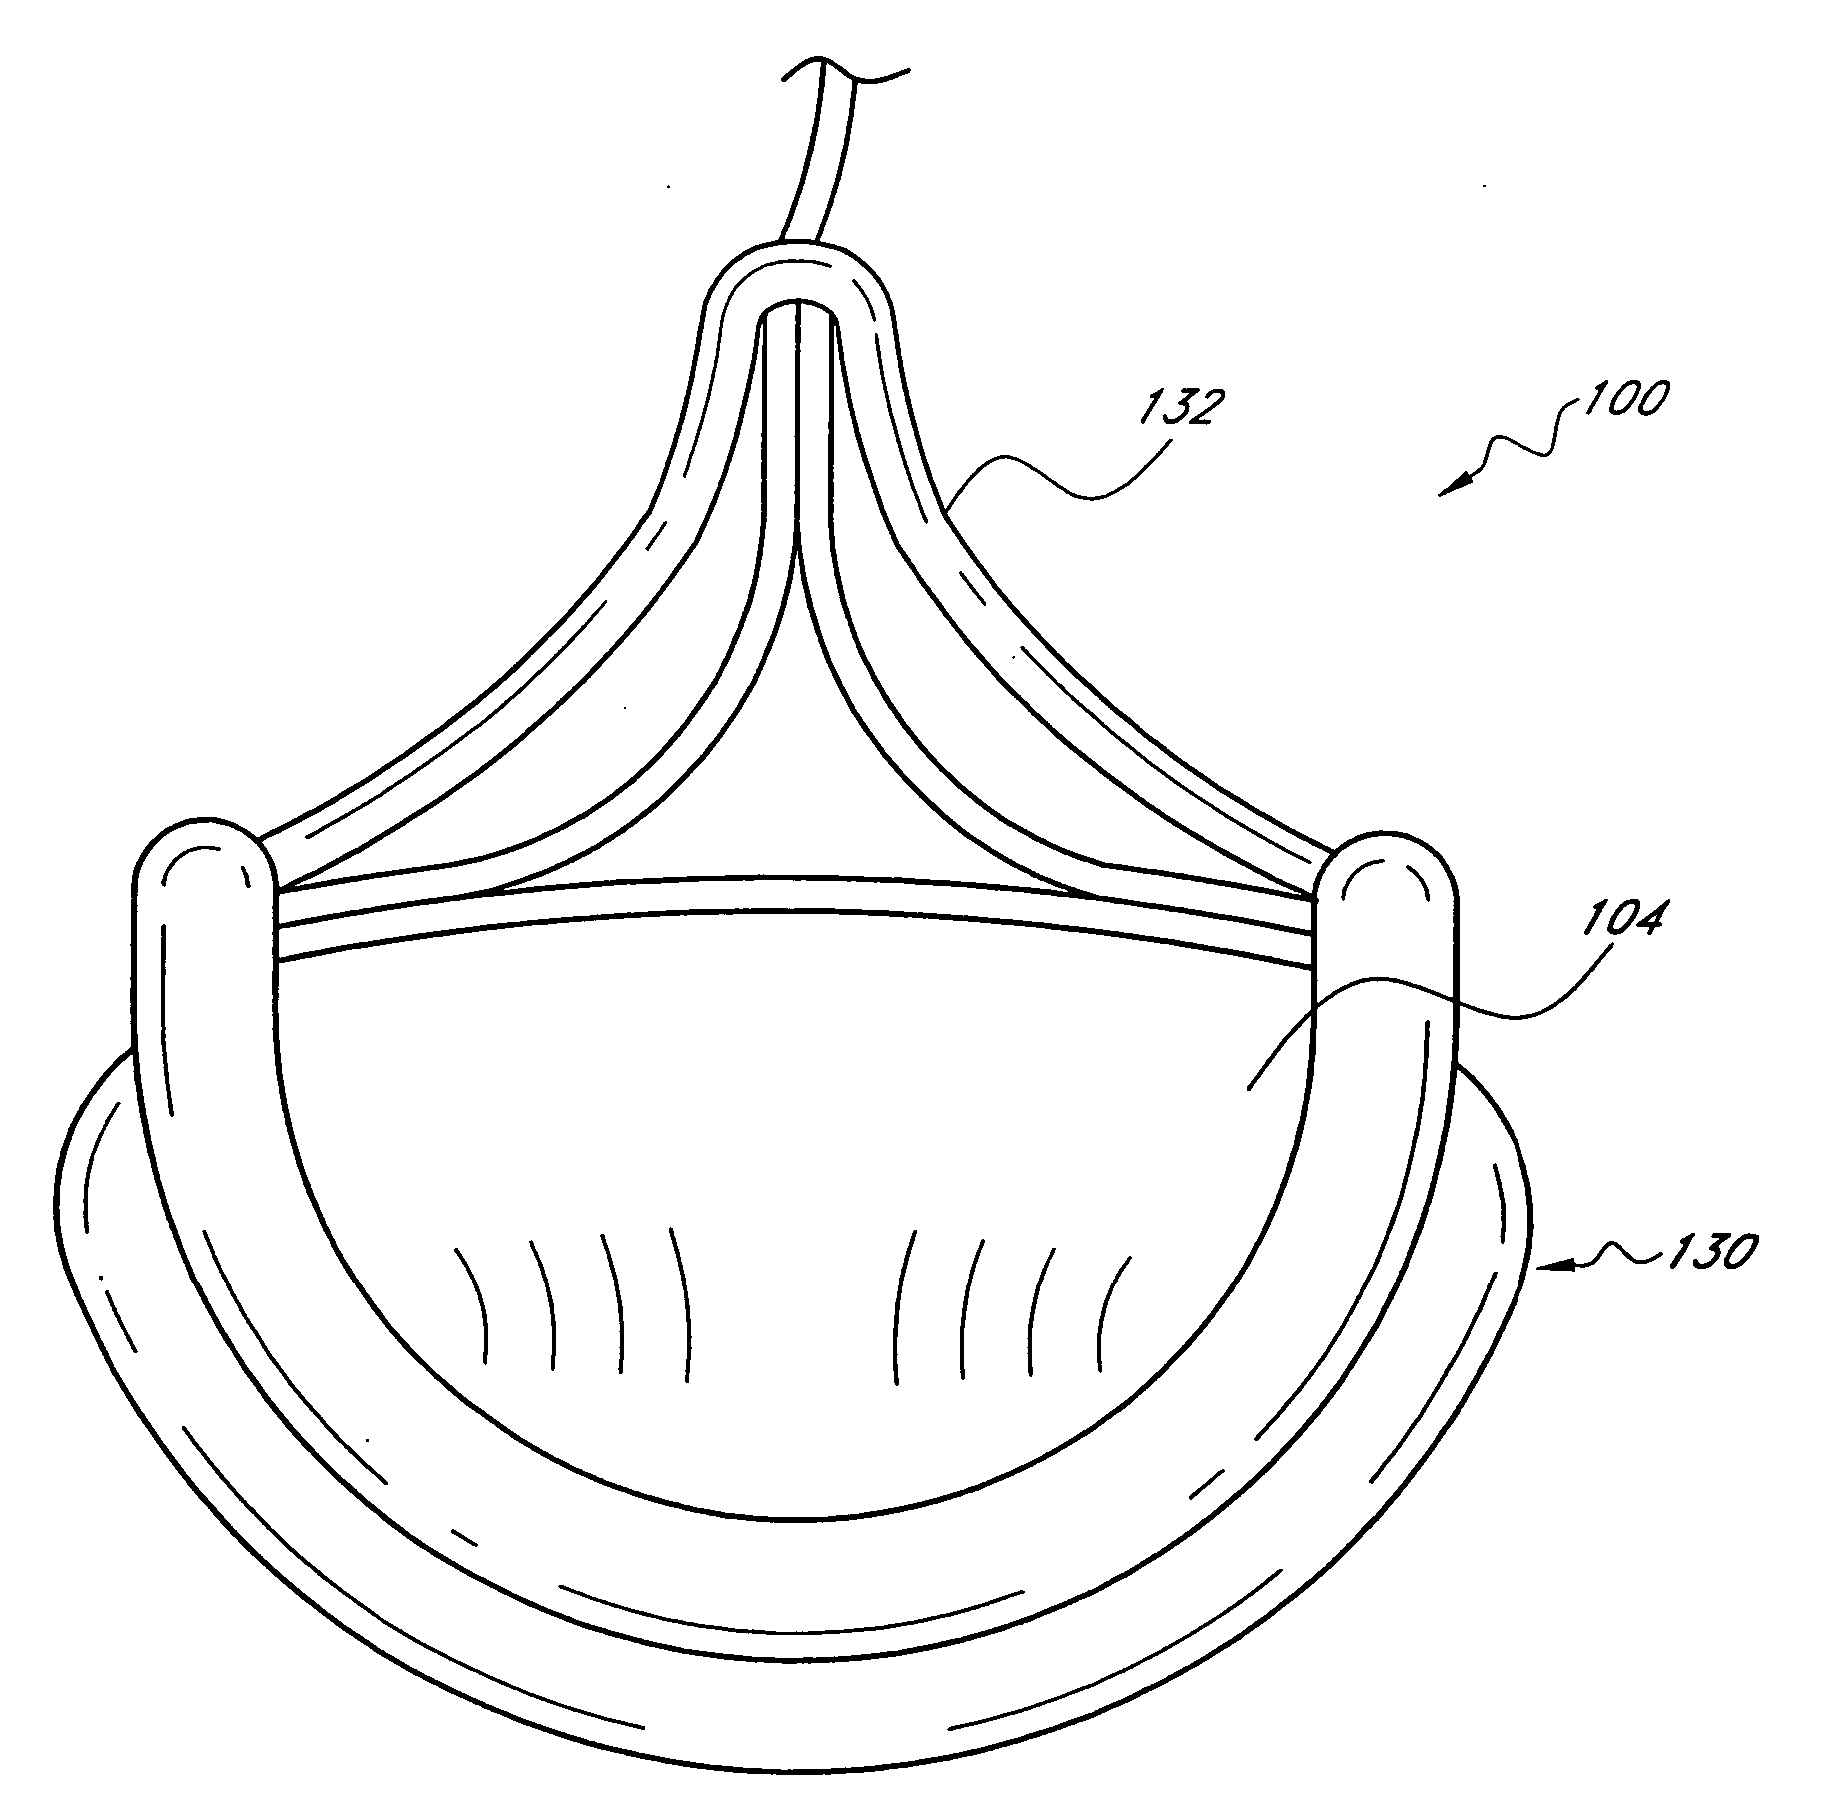 Translumenally implantable heart valve with formed in place support